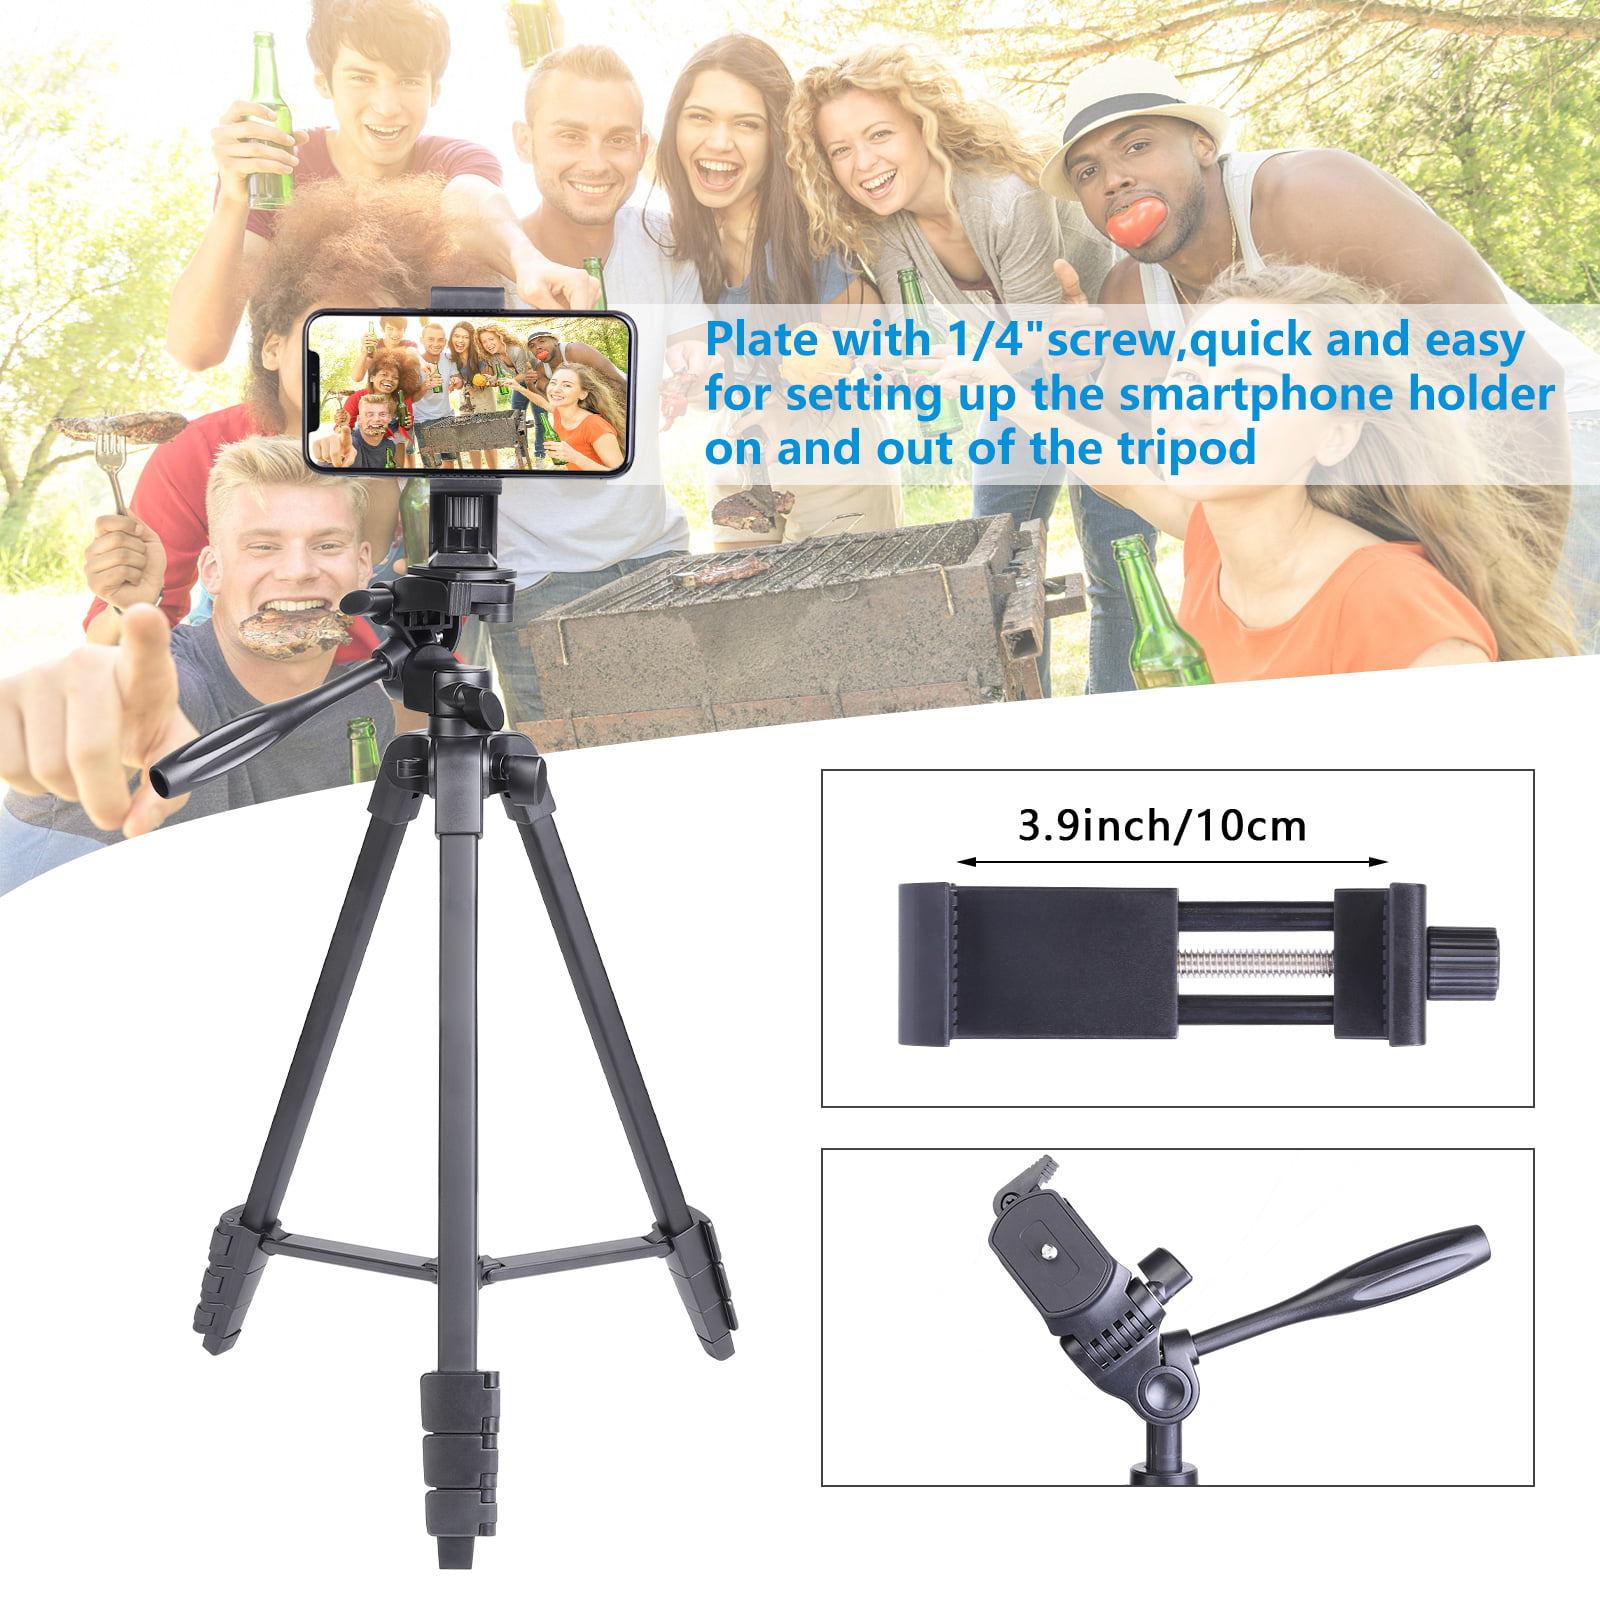 43.3inch Bluetooth Selfie Sticks Tripod Vlogging Extendable 3 in 1 Aluminum Selfie Stick with Wireless Remote and Tripod Stand 360 Rotation for iPhone Android Phone Outdoor Video Recording 